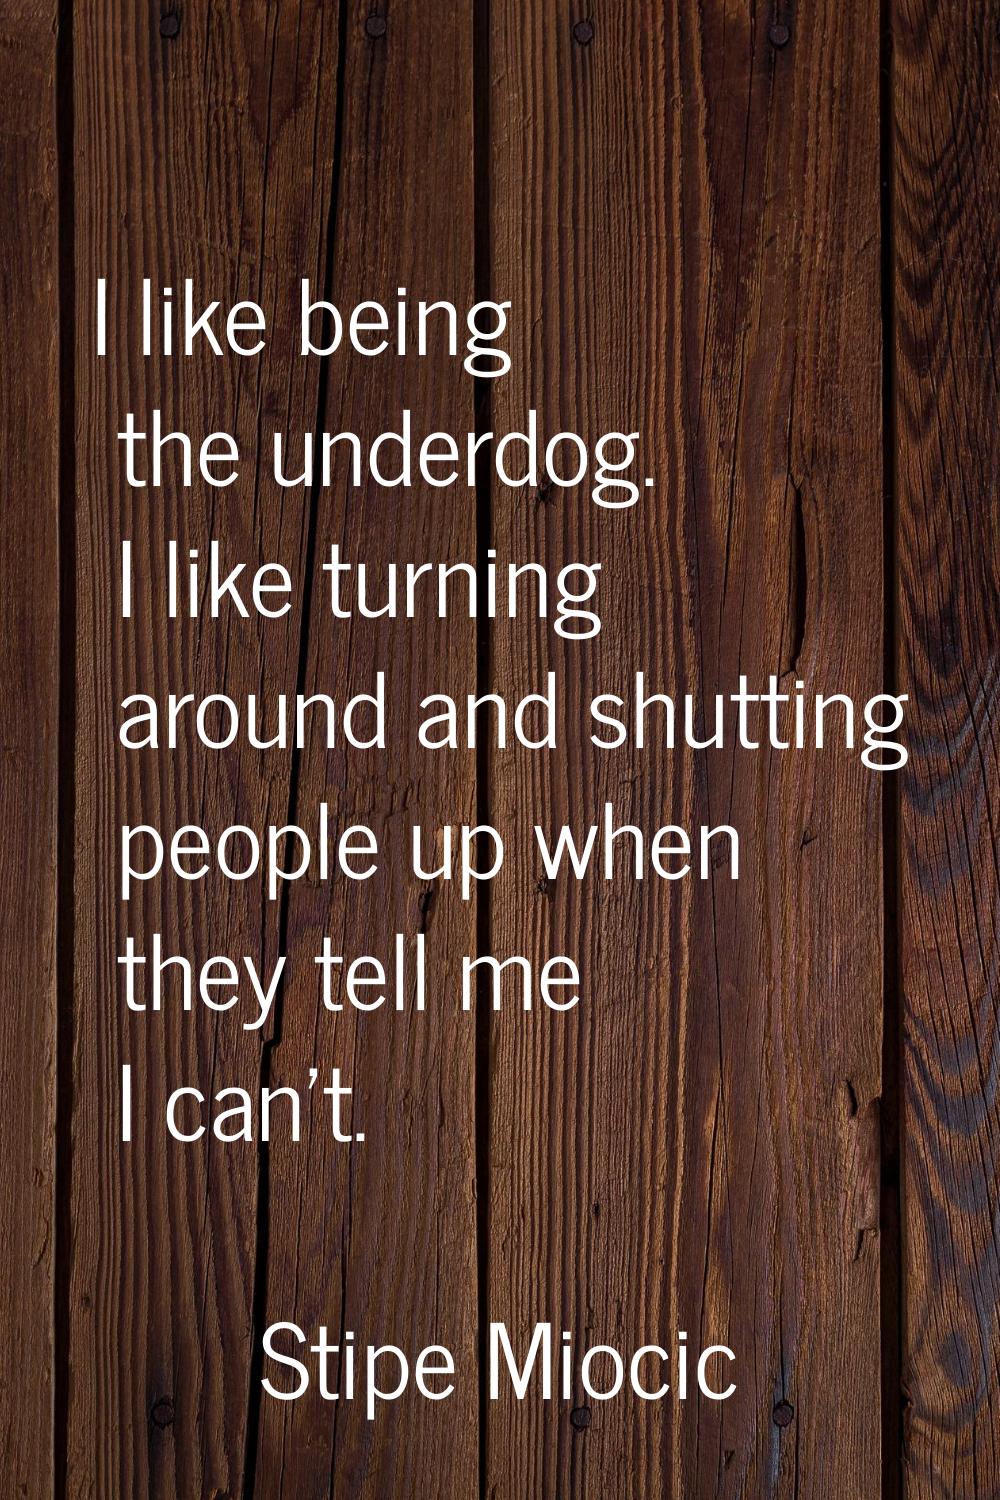 I like being the underdog. I like turning around and shutting people up when they tell me I can't.